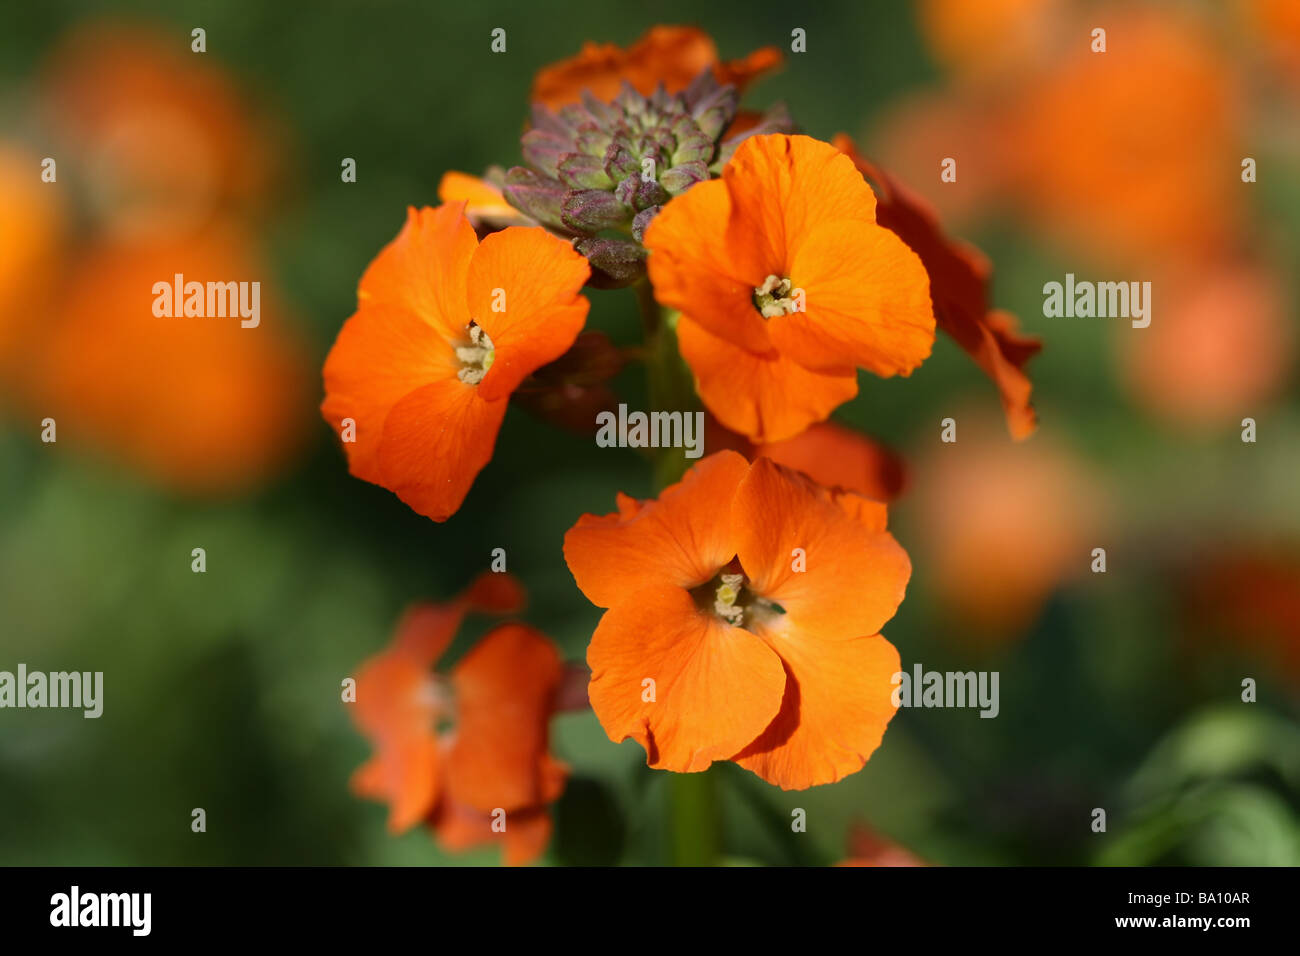 Erysimum,Wall Flower,Orange bloom in close up or macro showing flower detail and structure also in Blue,White Stock Photo